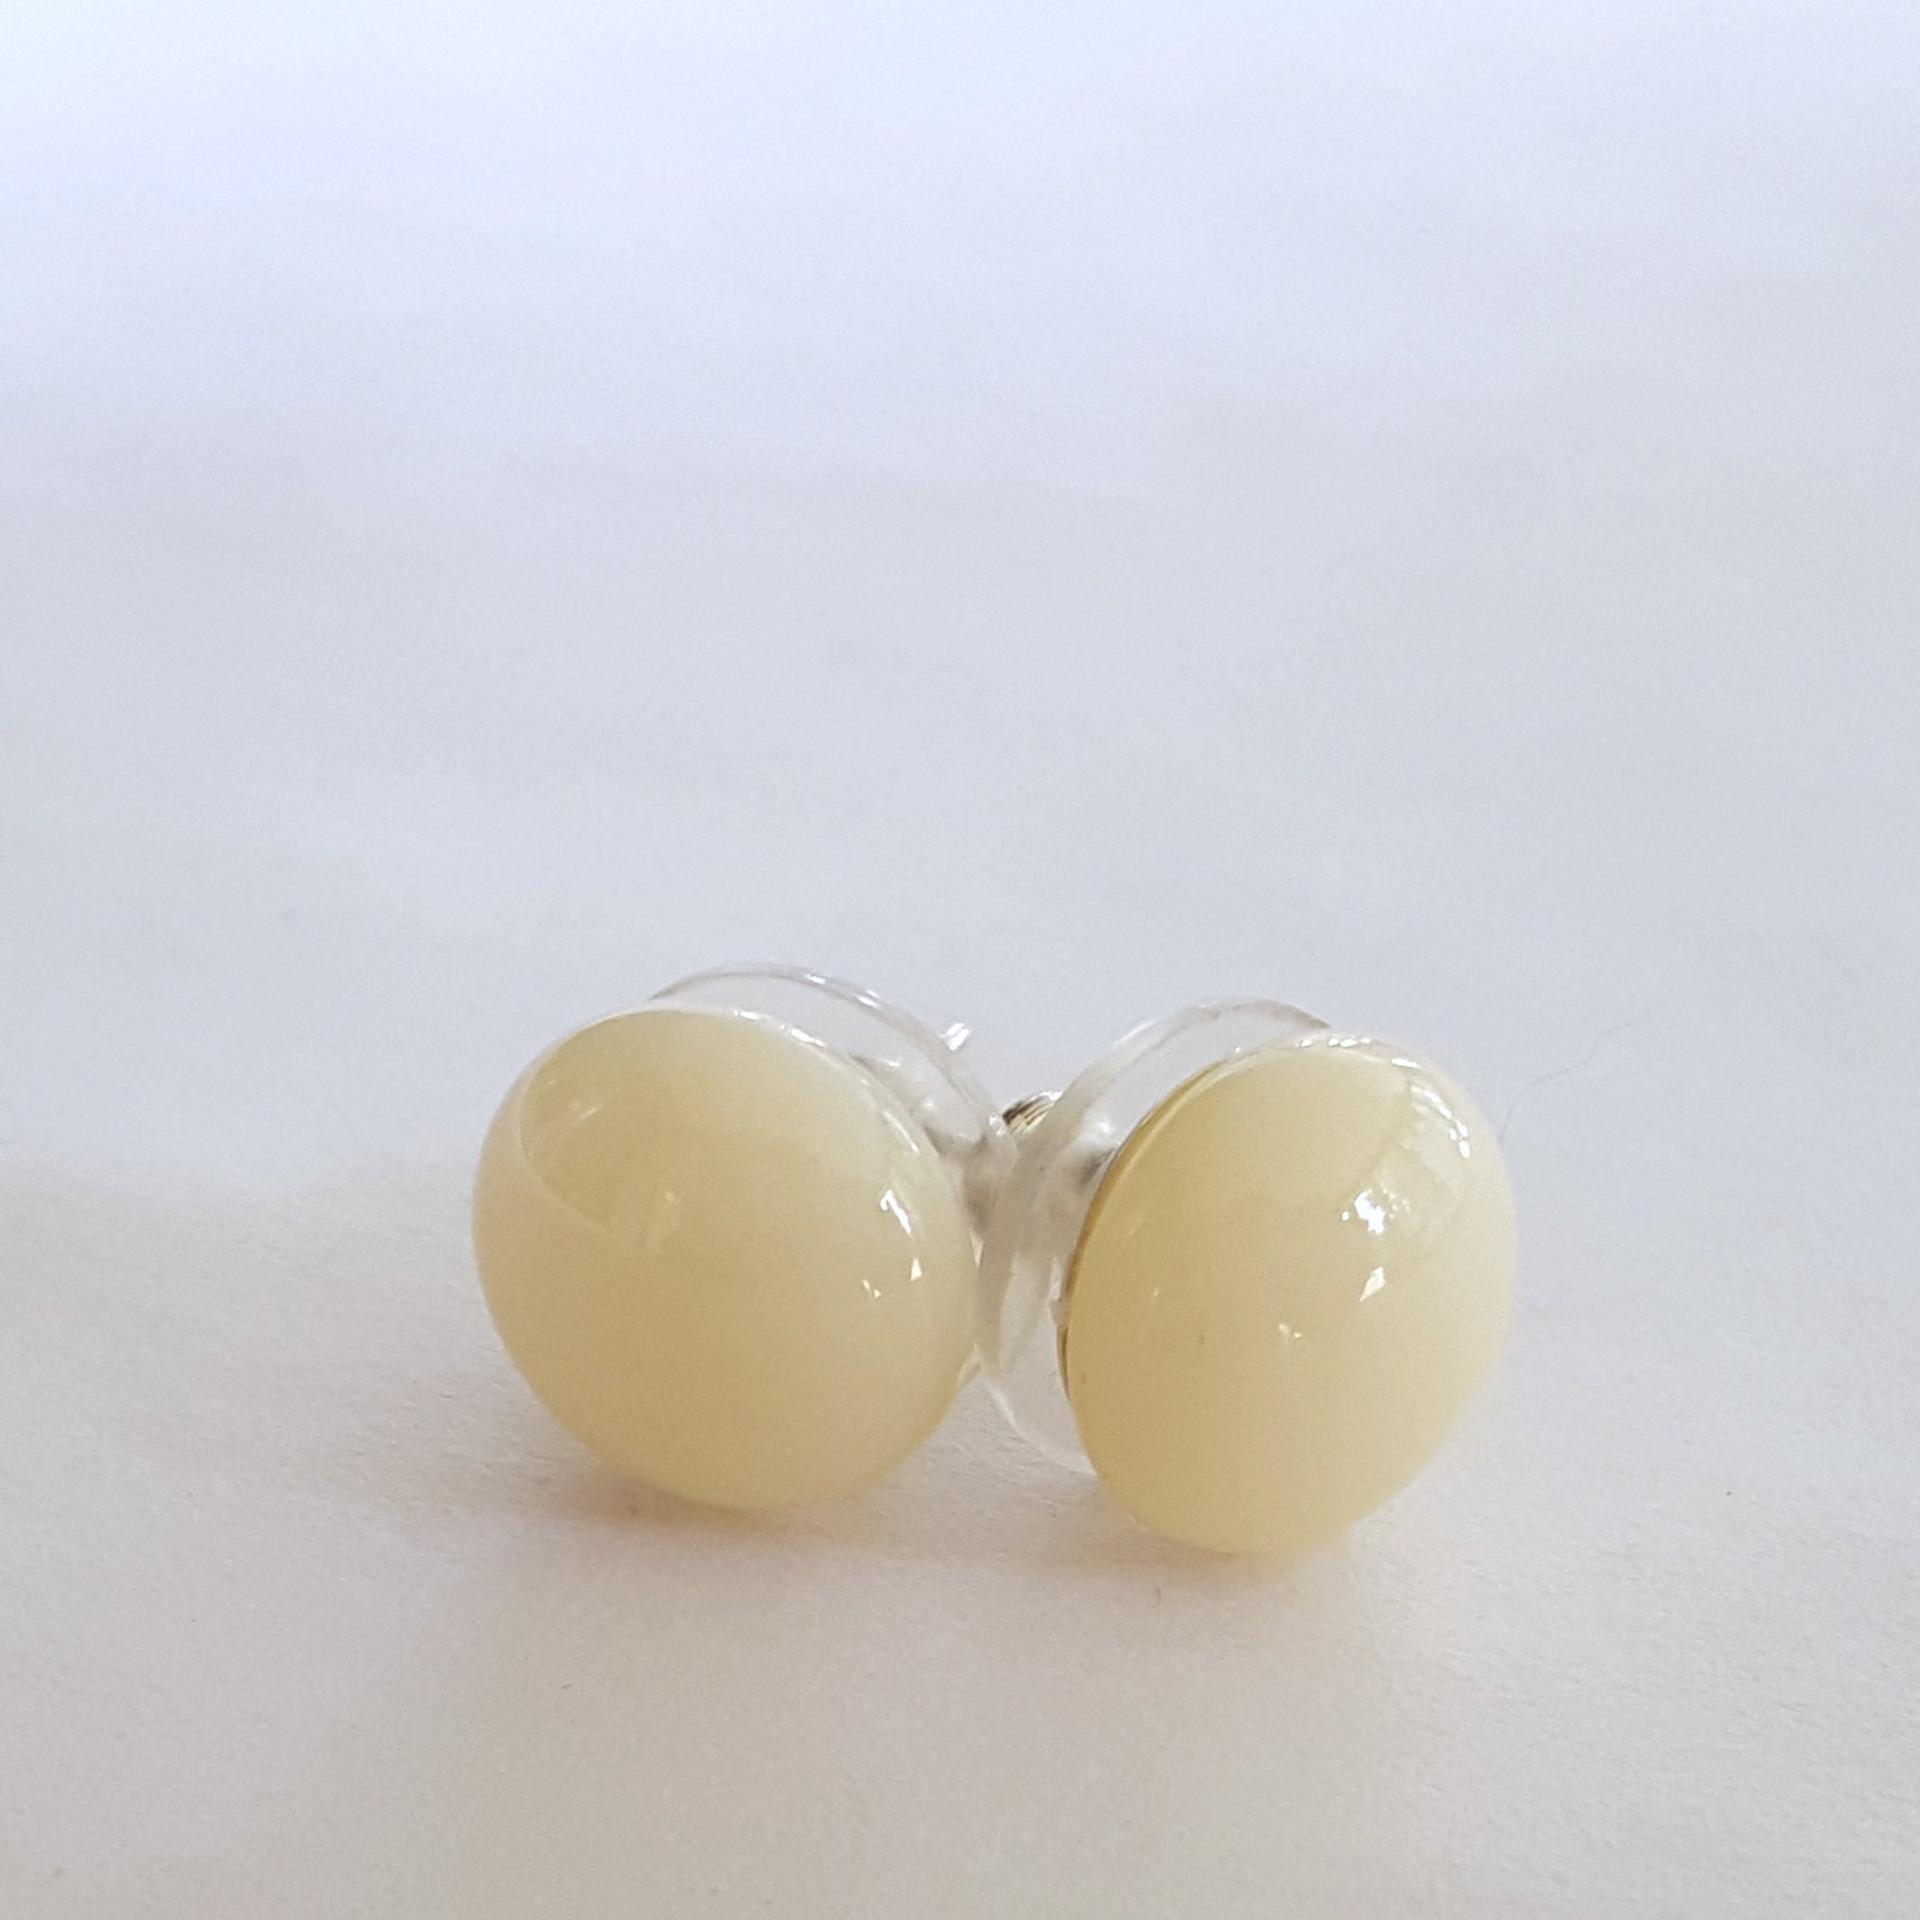 Ivory Stud Earrings, Sterling Silver Posts, Fused Glass